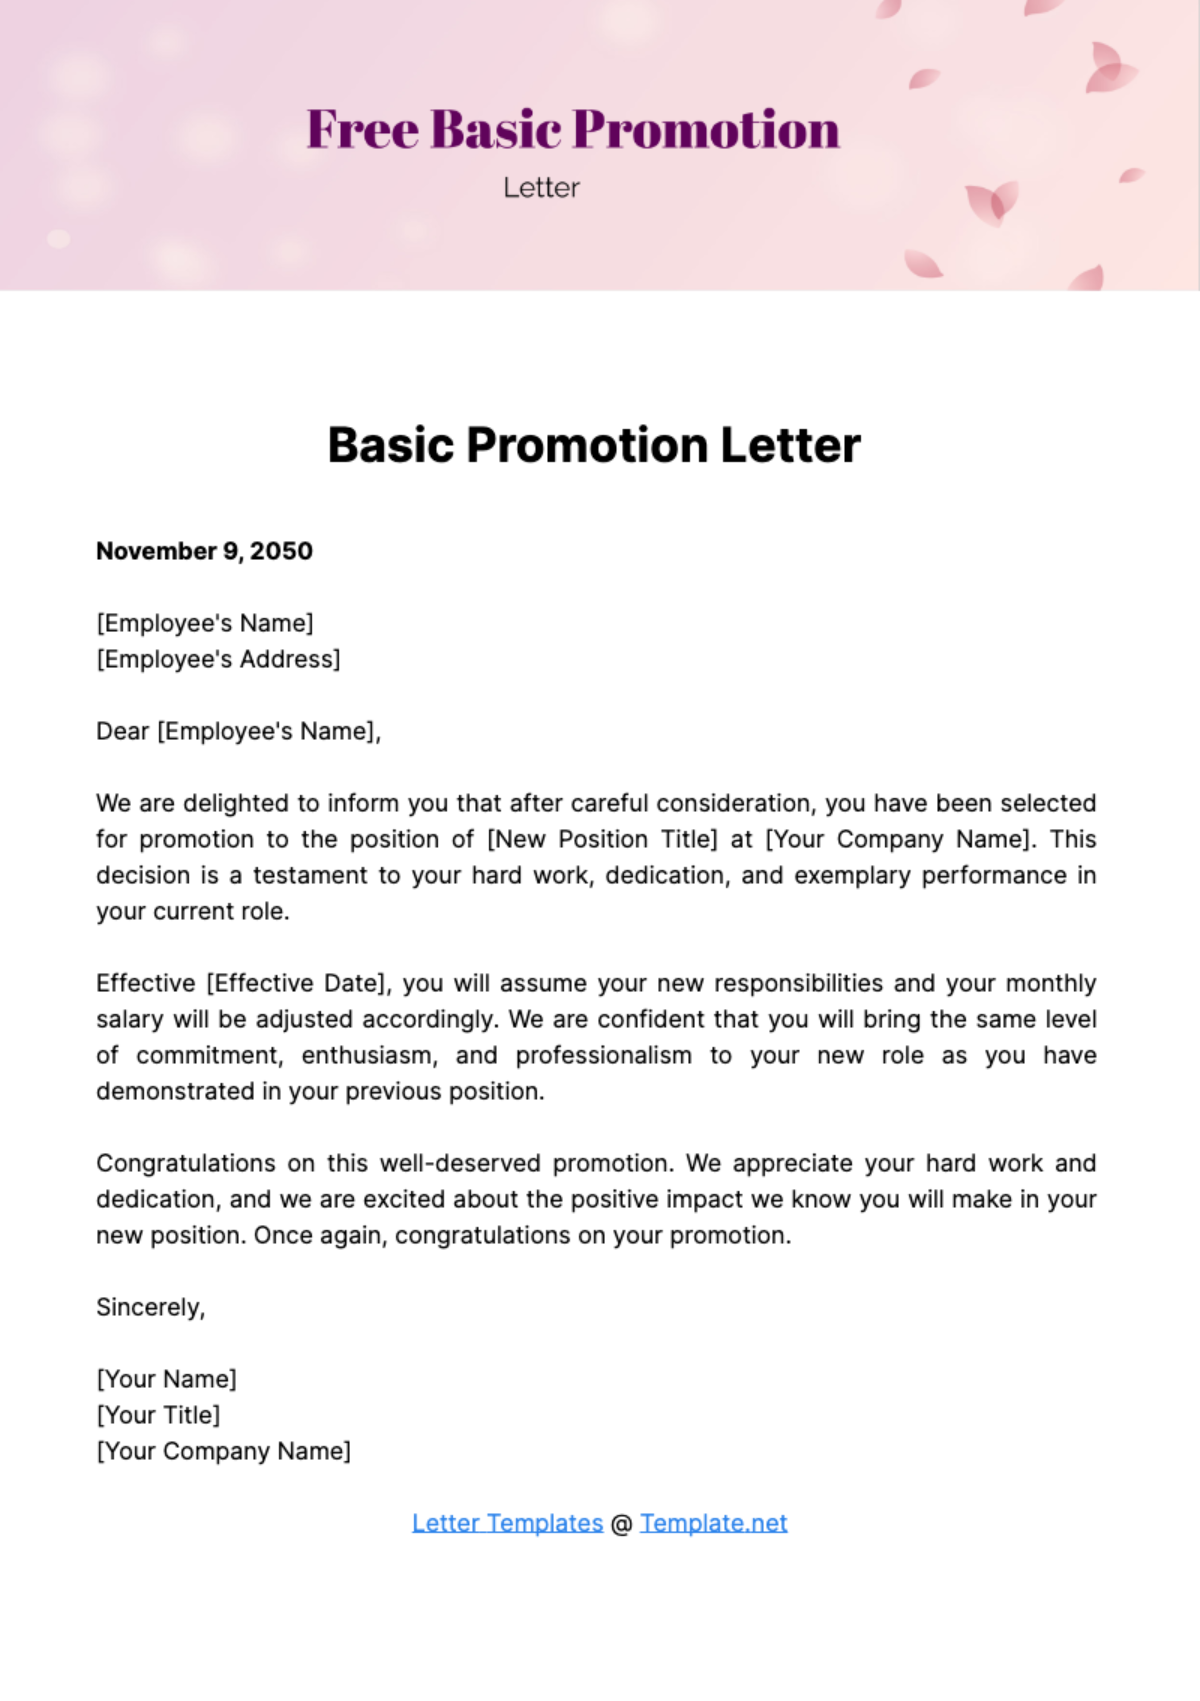 Free Basic Promotion Letter Template